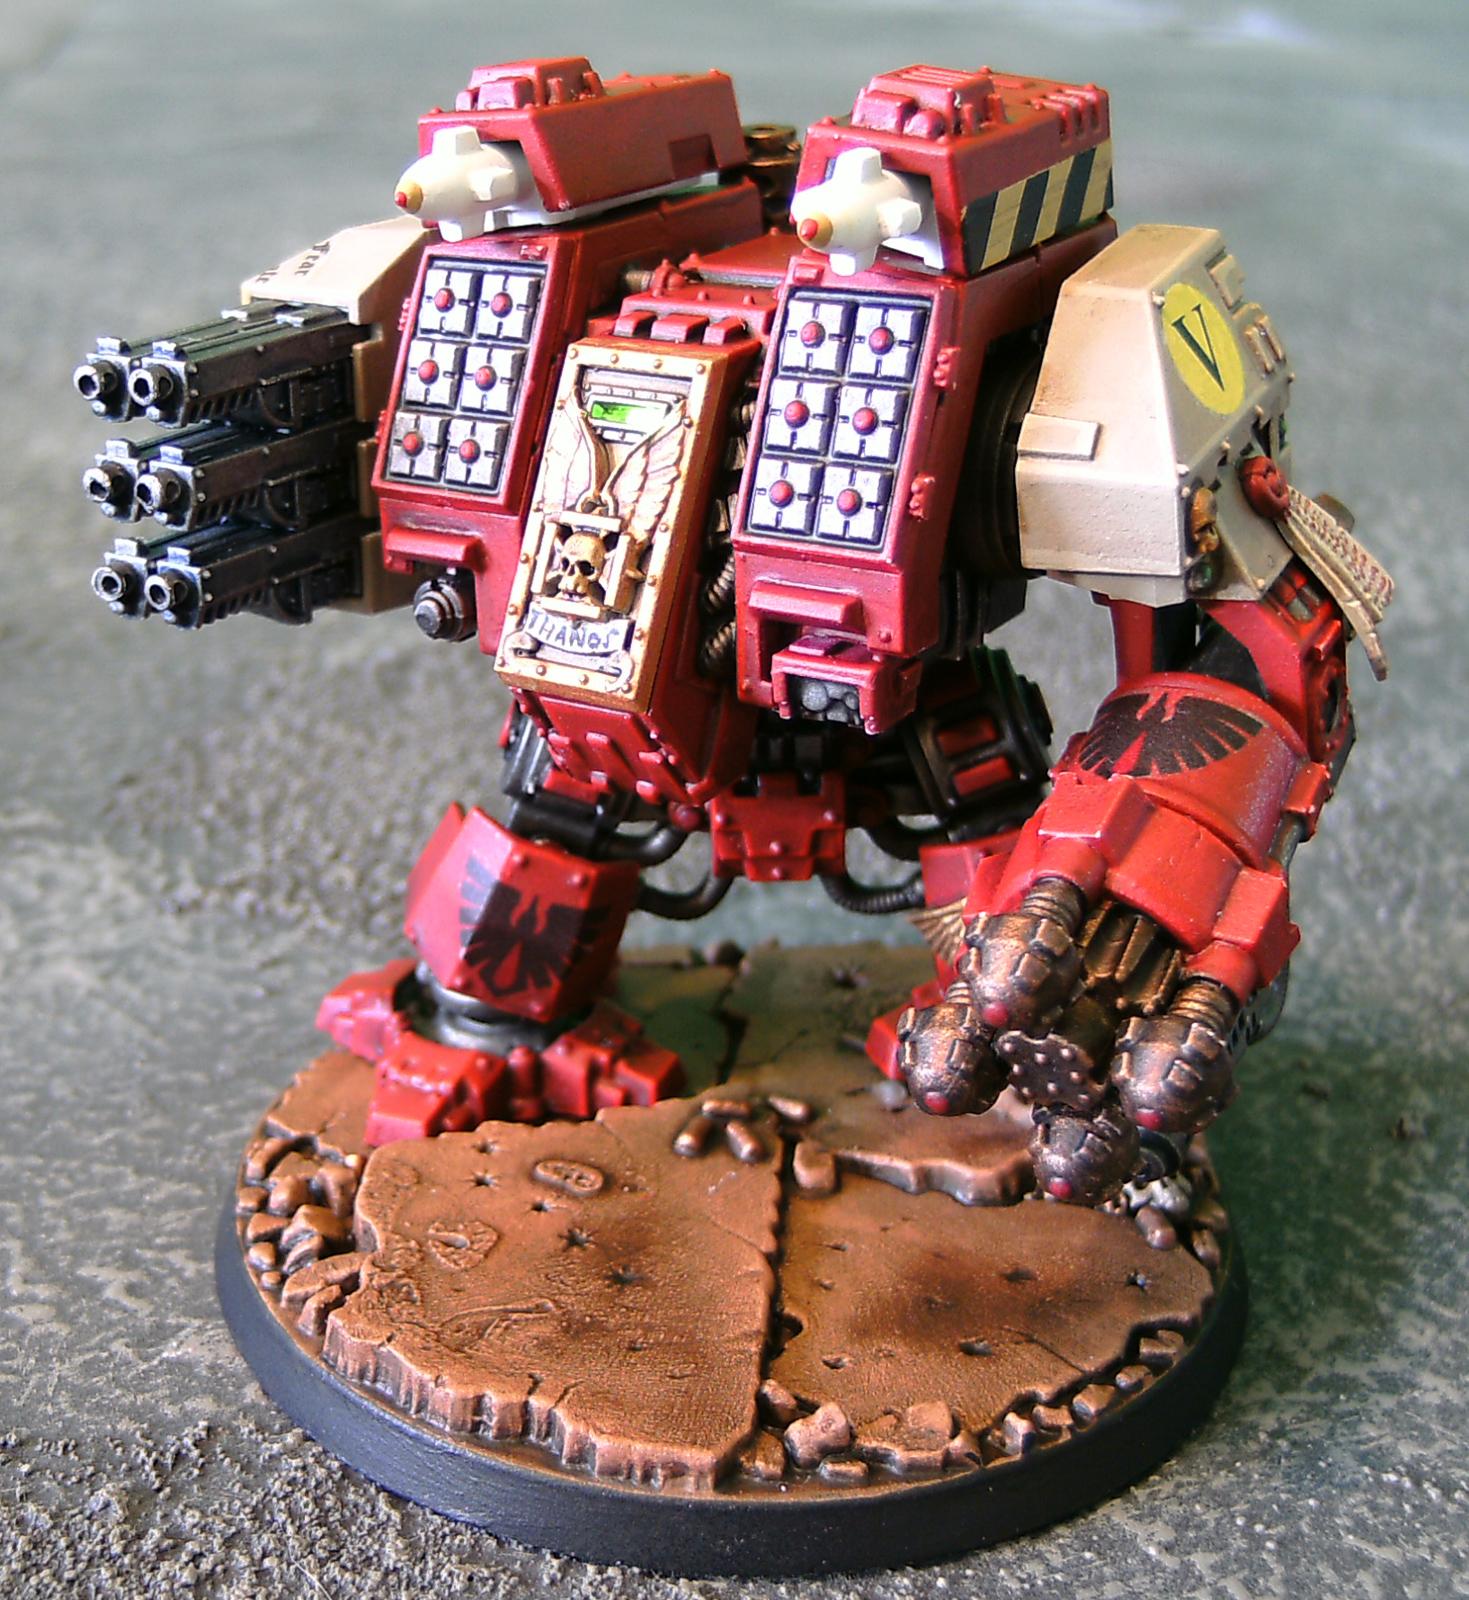 Blood Ravens, Dreadnought, Ironclad, LED, Lights, Ouze, Rifleman, Space Marines, Warhammer 40,000